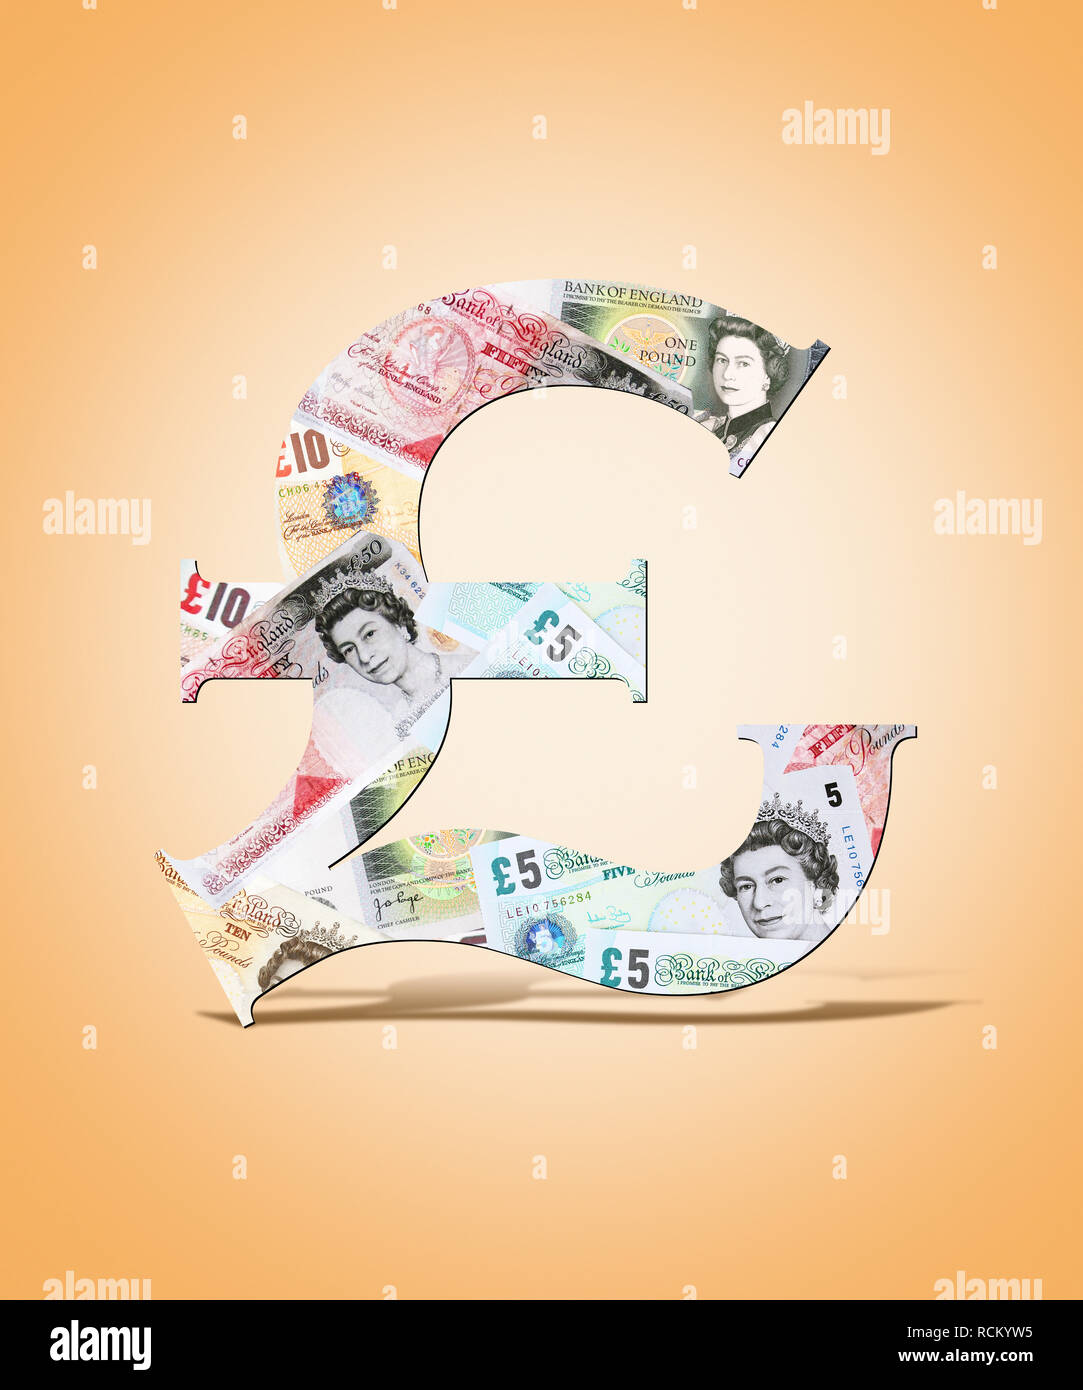 GBP banknote in shape of pound sign, computer generated image, peach colour background Stock Photo